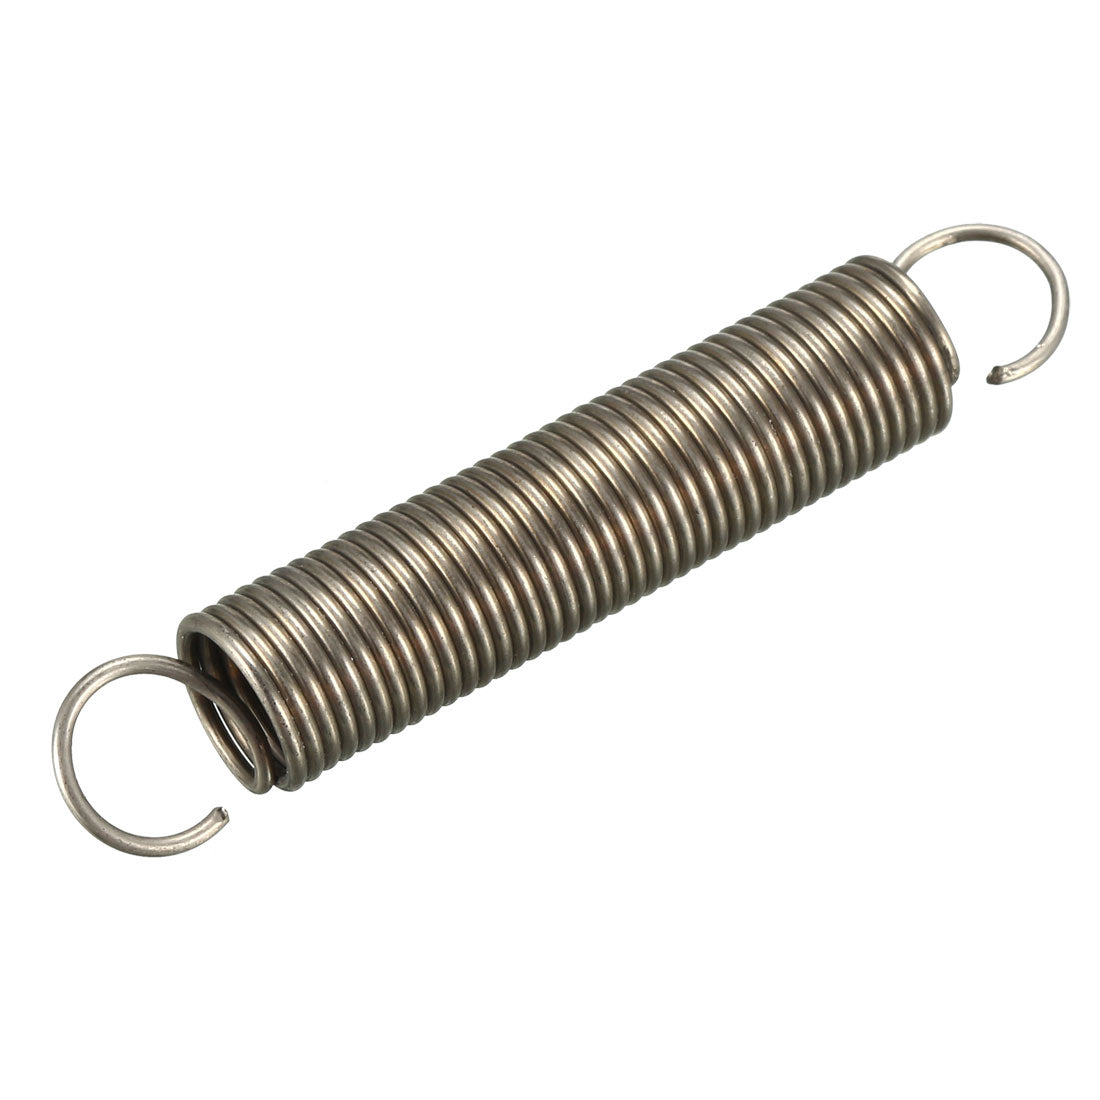 uxcell Uxcell Extended Tension Spring Wire Diameter 0.039", OD 0.39", Free Length 2.36" 5pcs